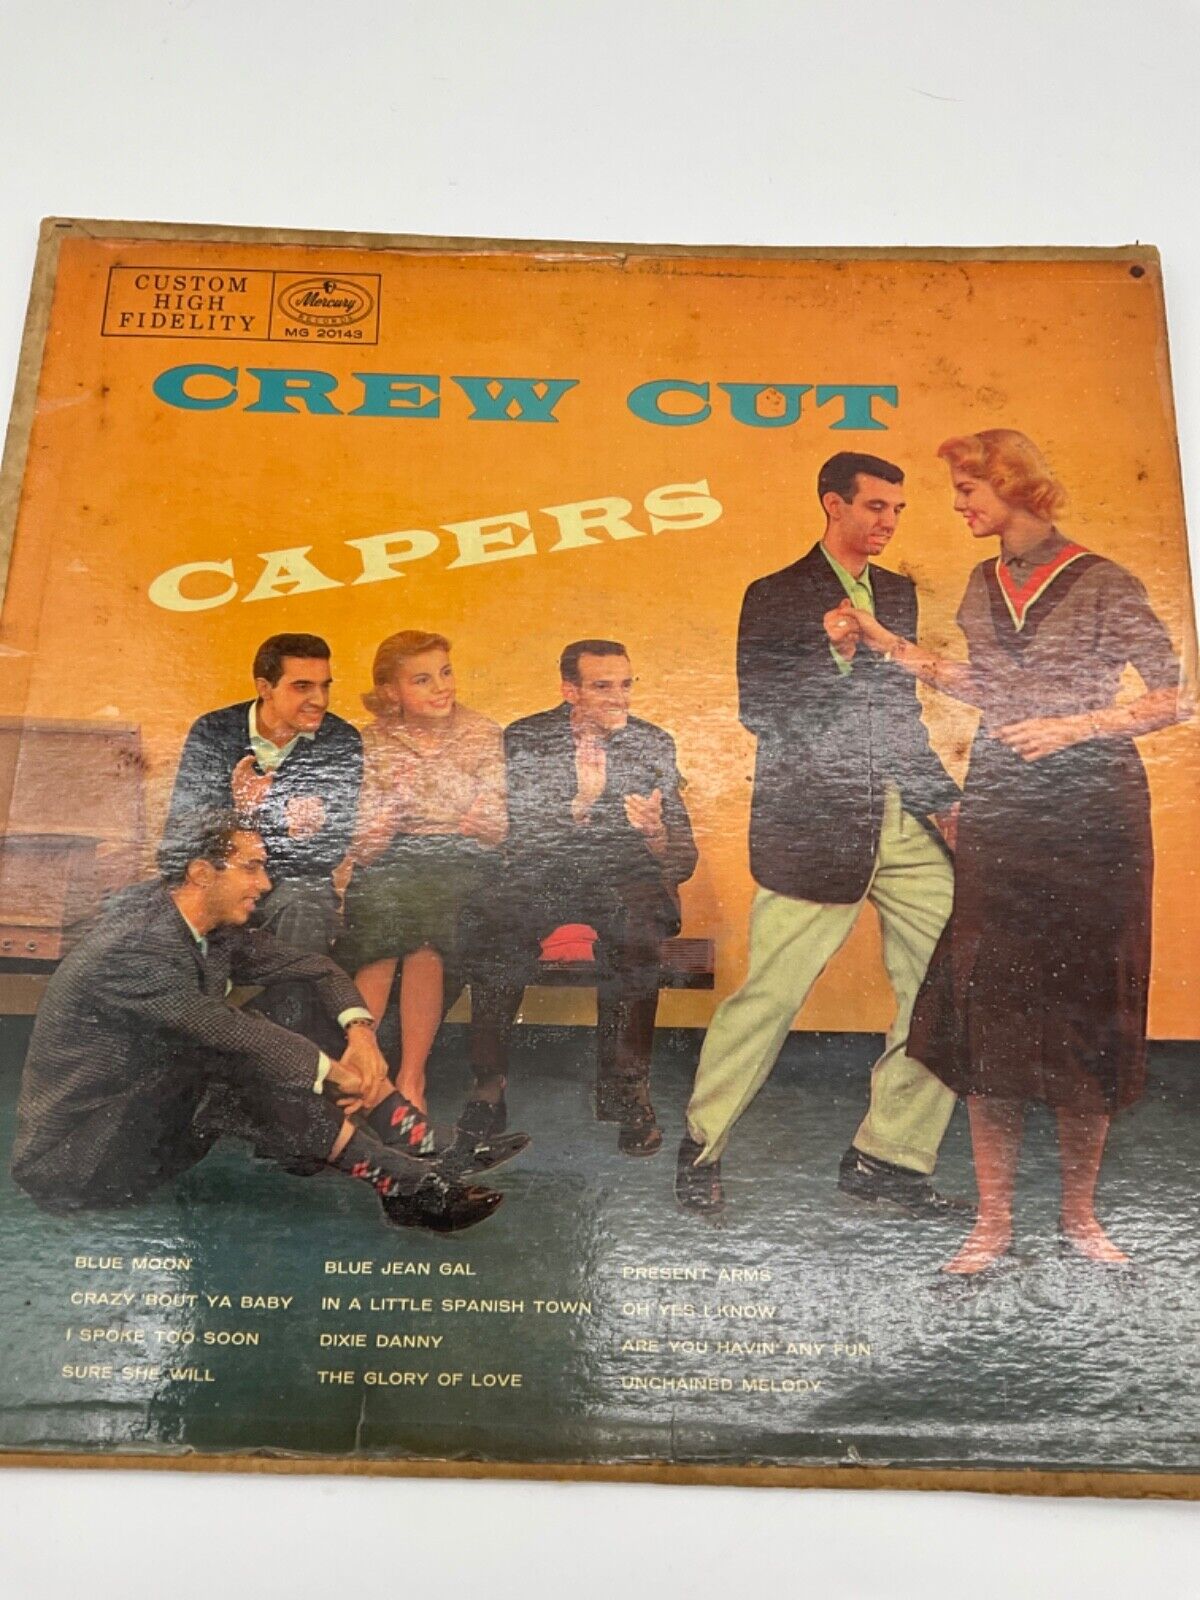 Vintage 1956 The Crew Cuts LP Rock And Roll Bash Mercury MG 20144 Classic Rock